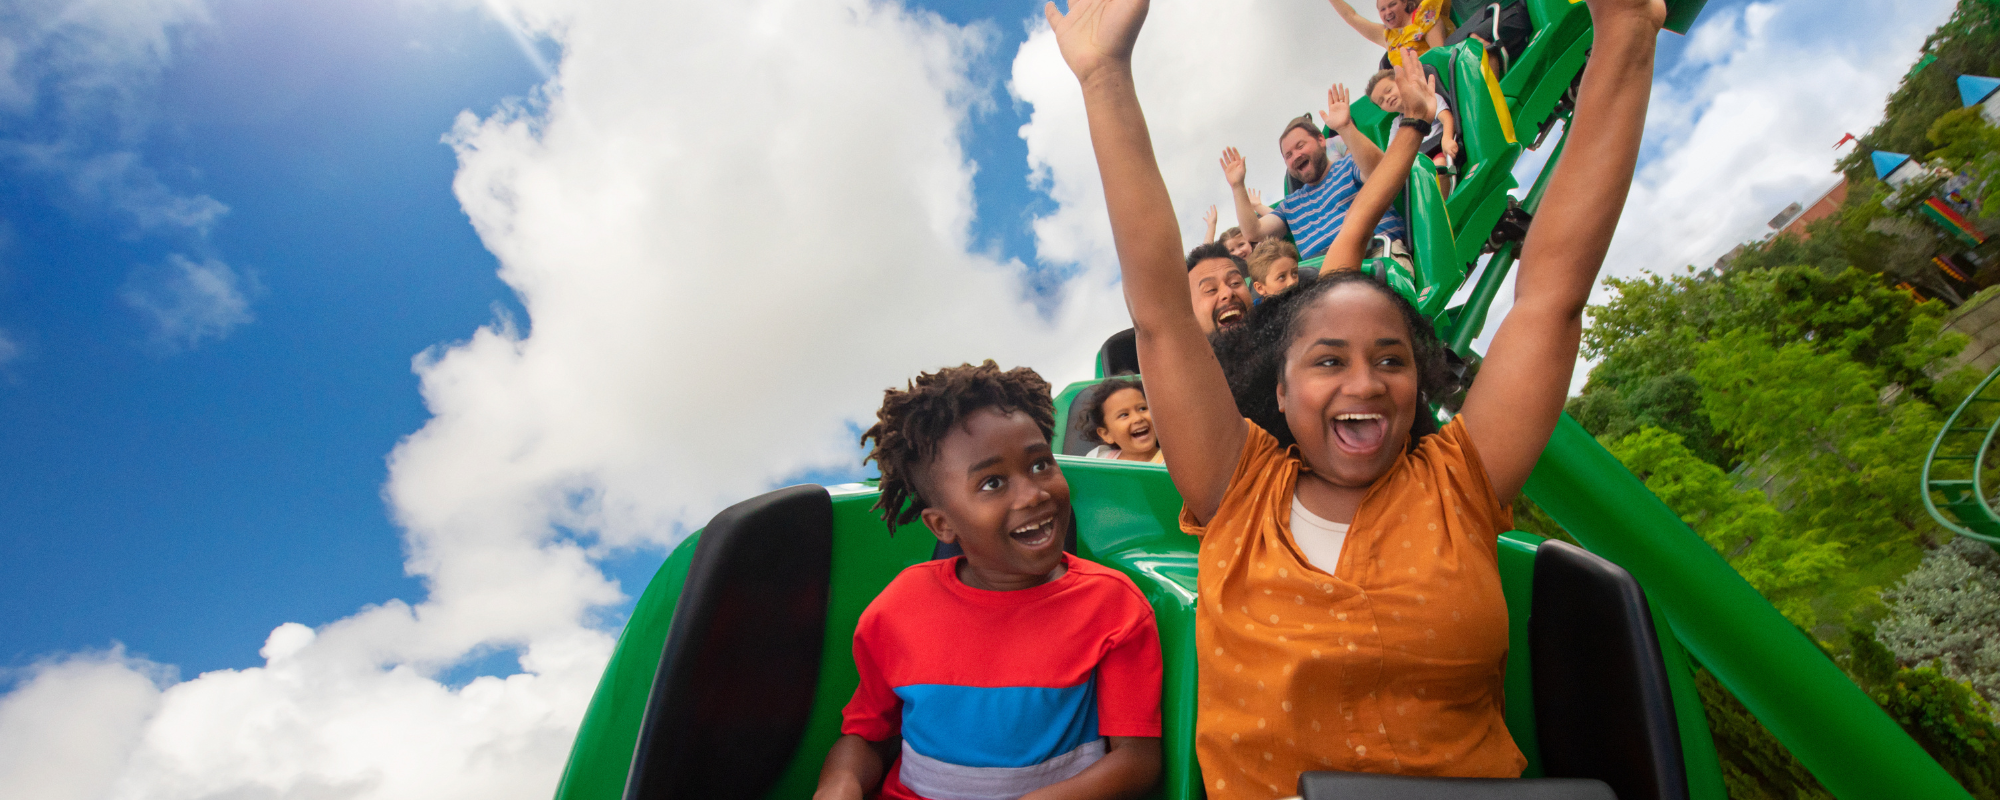 7 Indoor Amusement Parks in New York for Year Round Fun